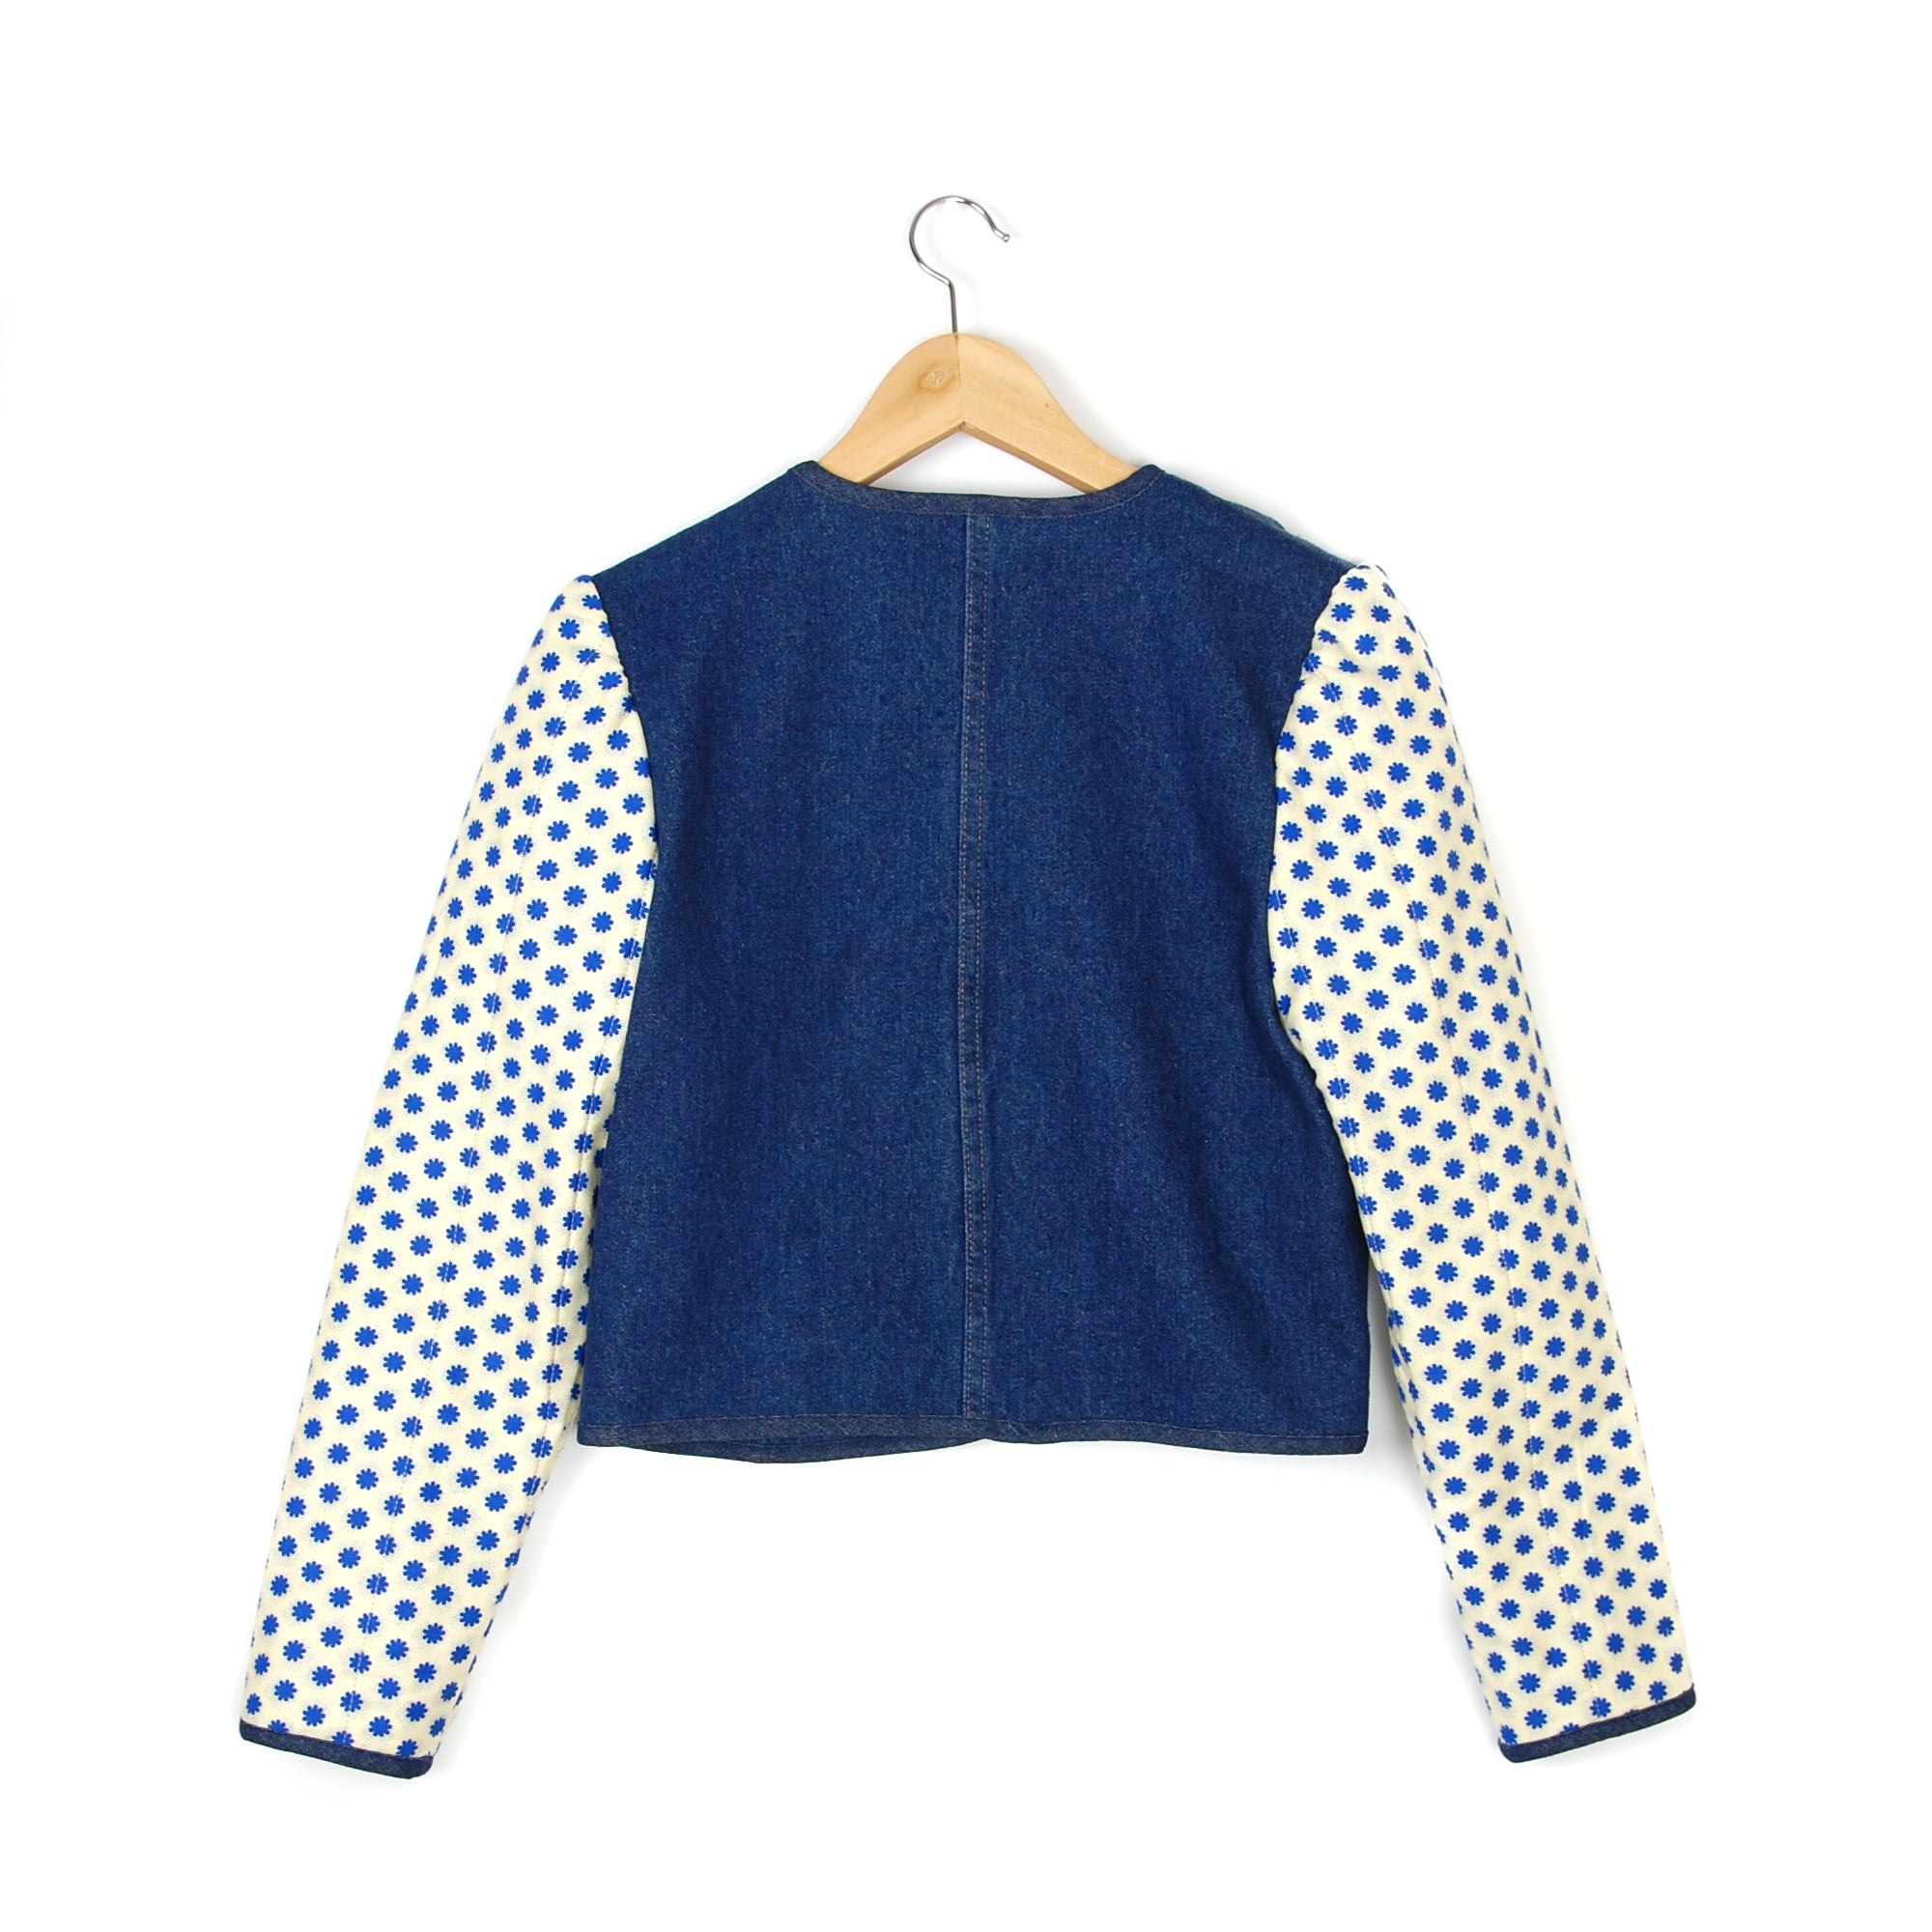 MOMMIE DEAREST QUILTED JACKET - Late to the Party